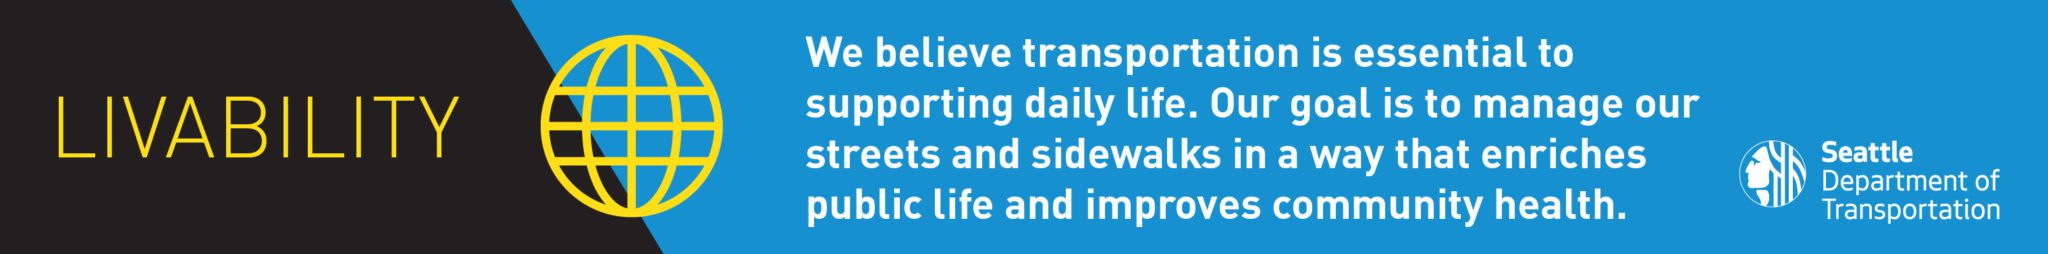 Livability: We believe transportation is essential to supporting daily life. Our goal is to manage our streets and sidewalks in a way that enriches public life and improves community health.